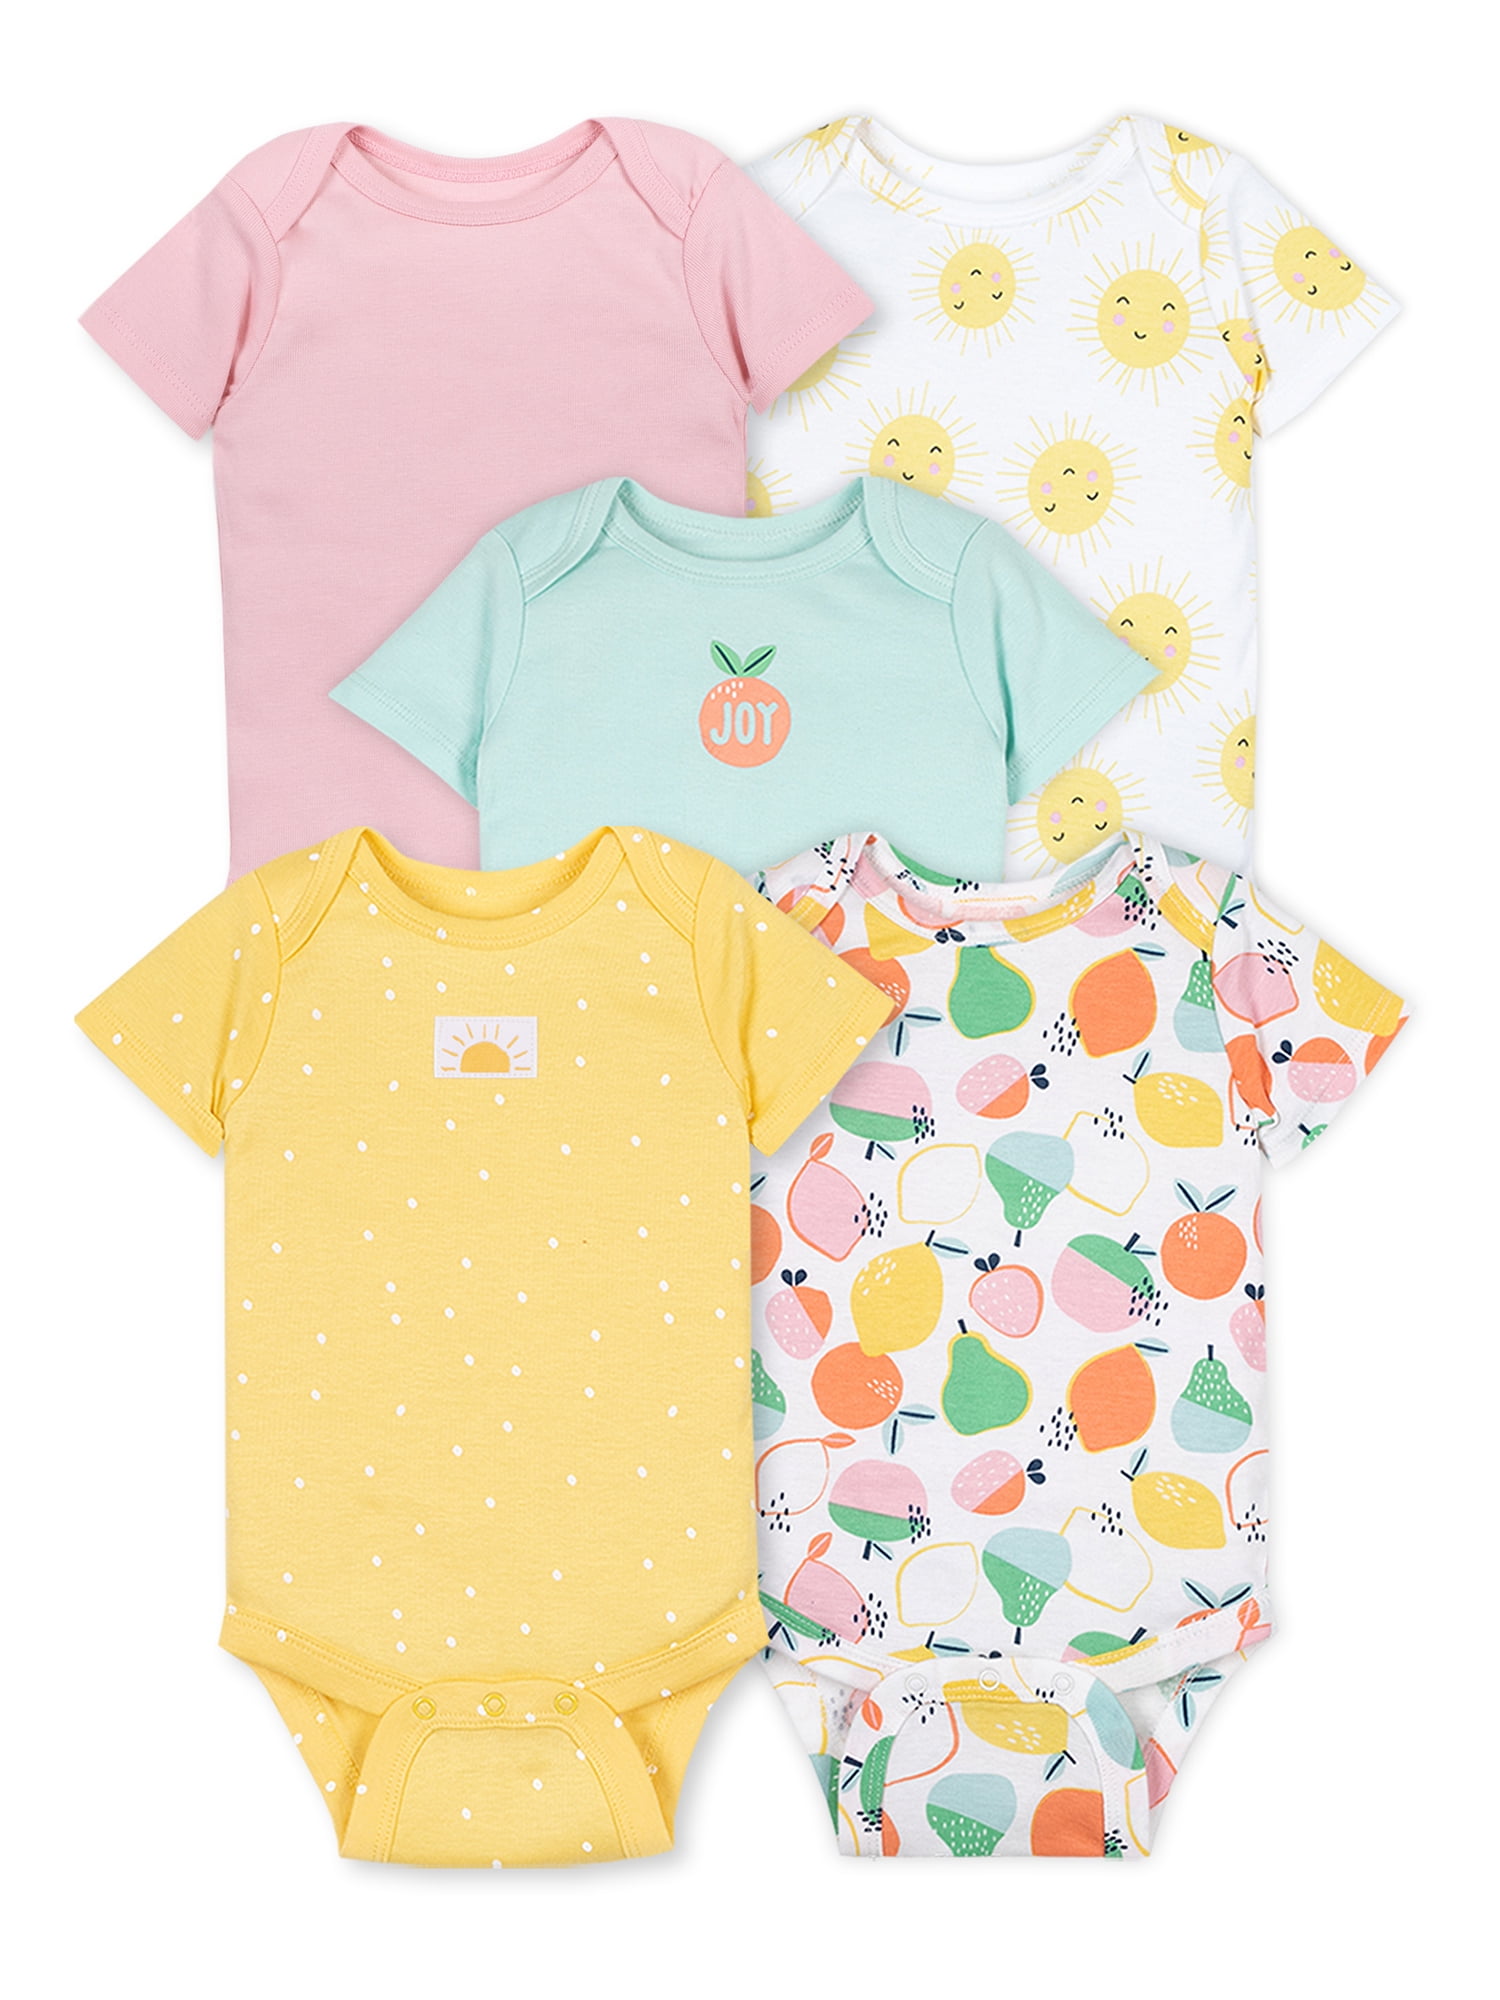 Toddler Baby Boy Girl Short Sleeve Organic Bodysuits Sunshine Will BE Ready in A Minute Kid Pajamas